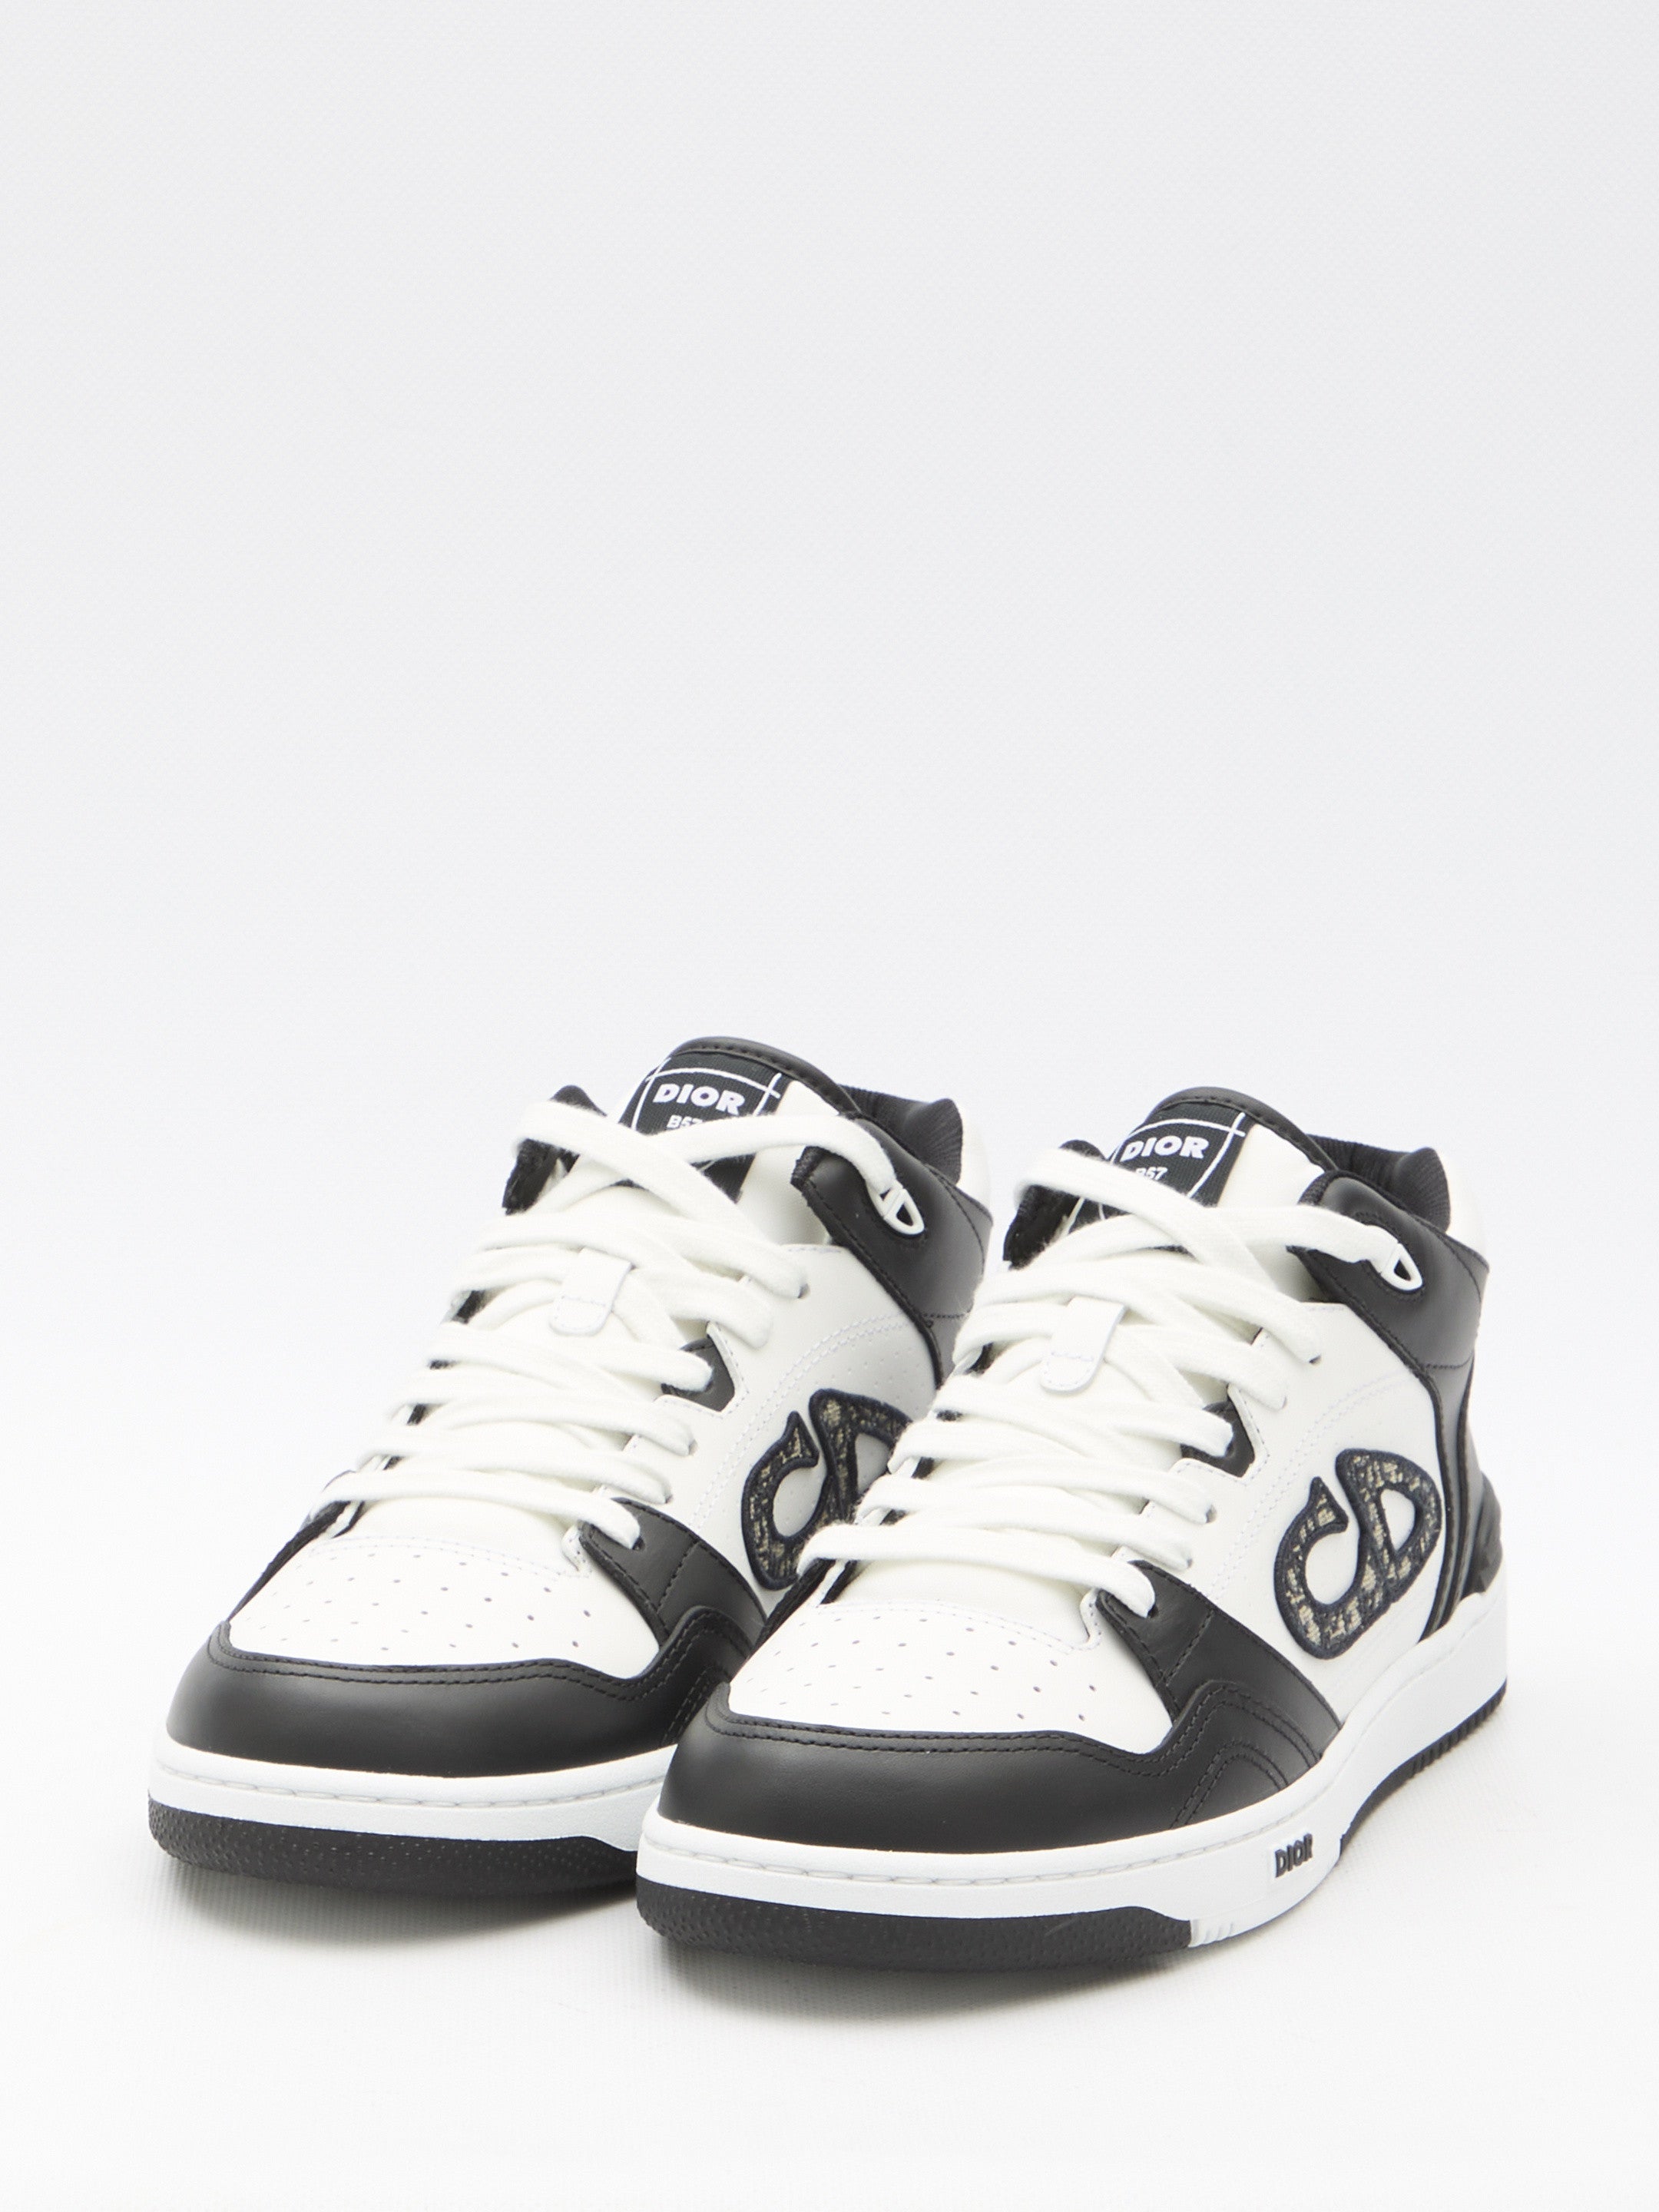 DIOR-HOMME-OUTLET-SALE-B57-Mid-Top-sneakers-Sneakers-ARCHIVE-COLLECTION-2.jpg